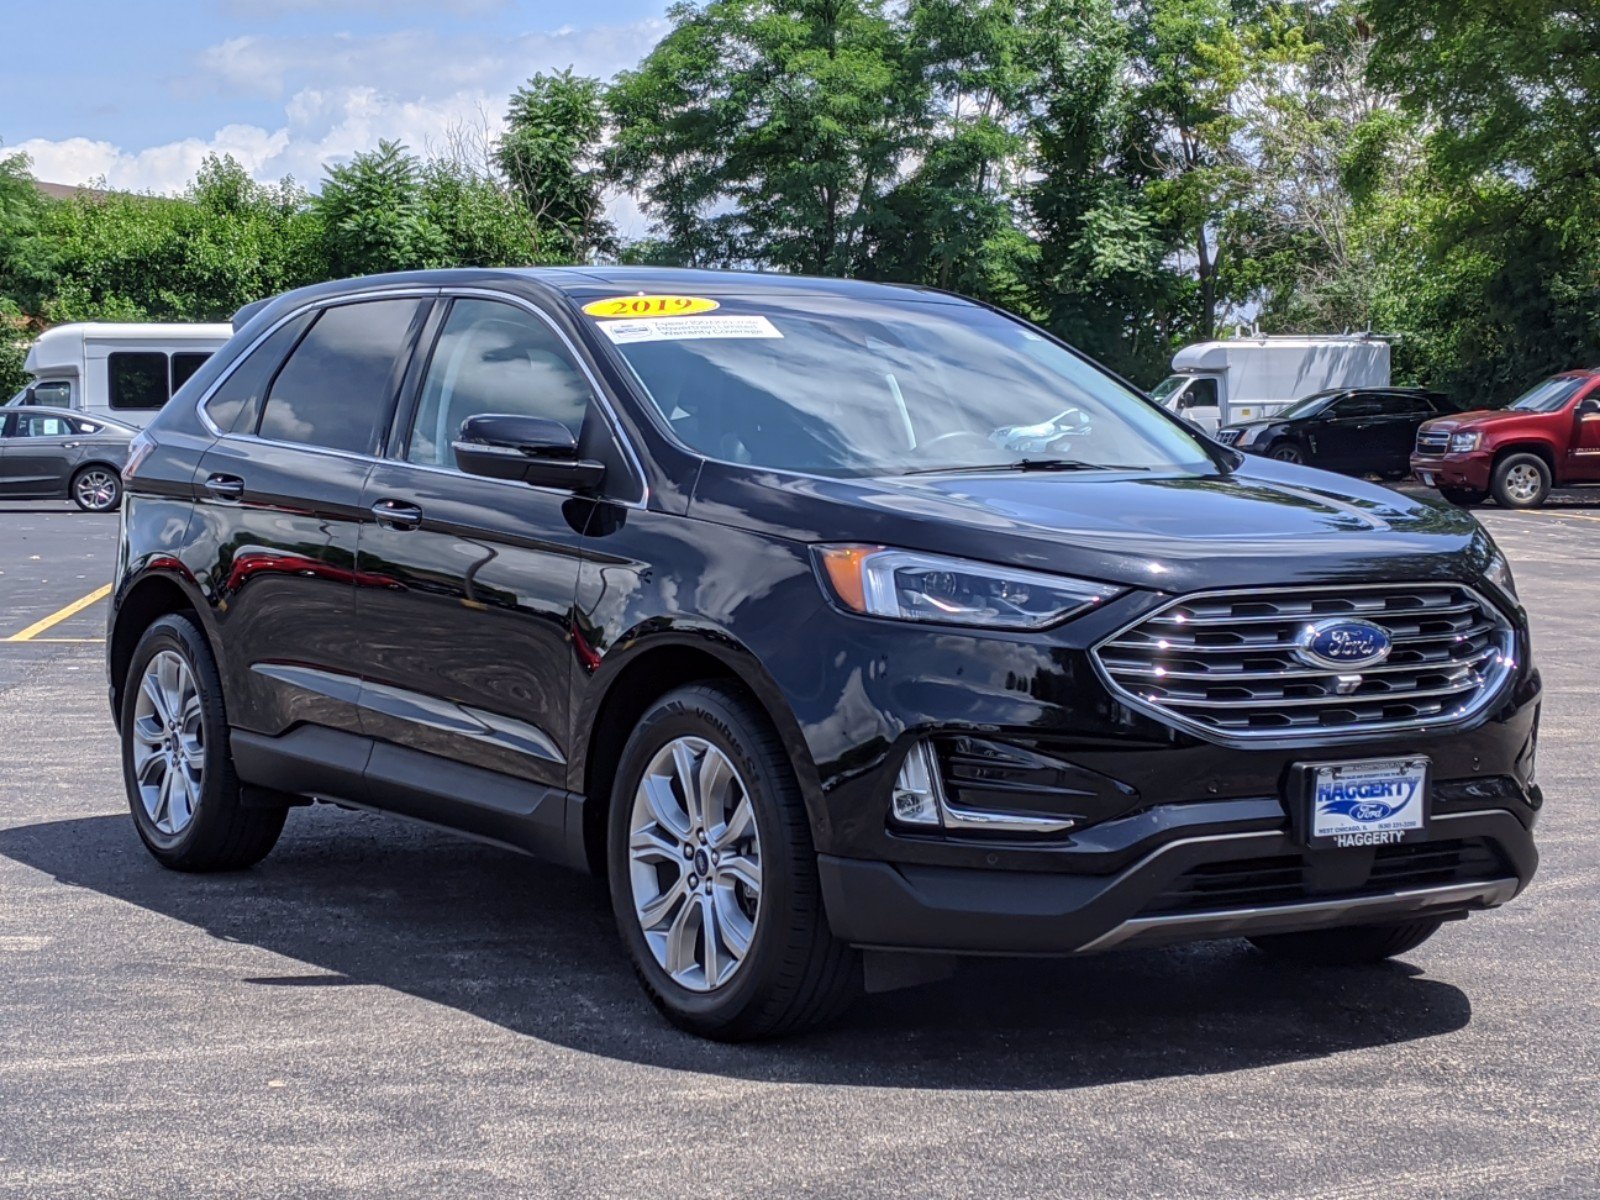 Certified Pre Owned 2019 Ford Edge Titanium AWD SUV in Glen Ellyn 3630 